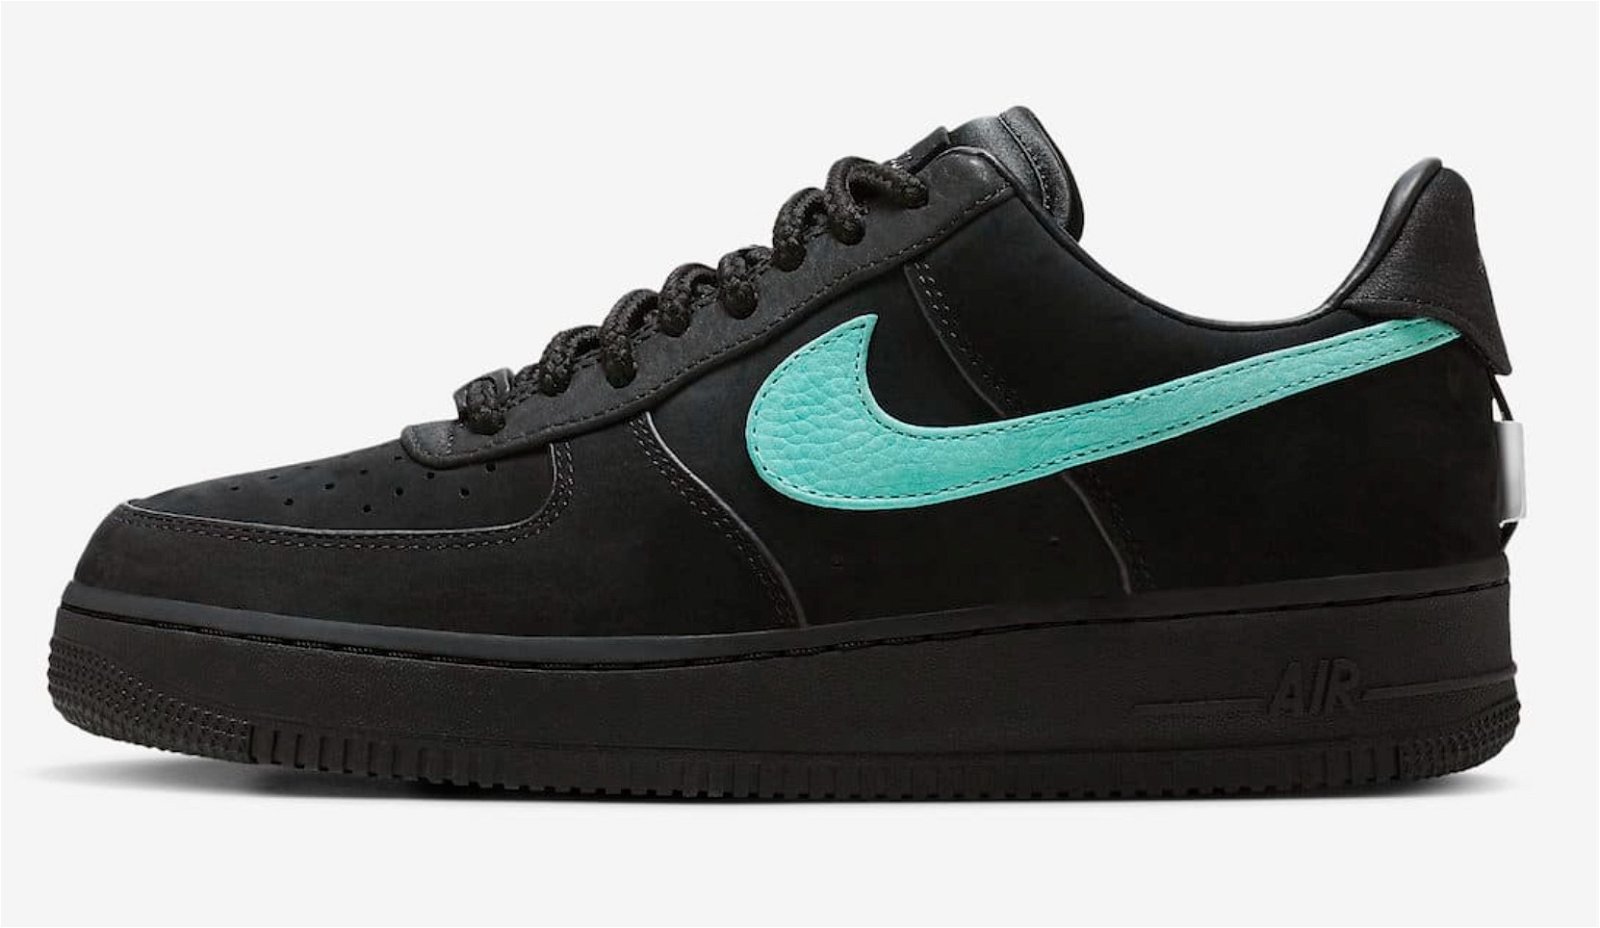 Tiffany & Co. X Nike Air Force 1 Low 1837 sneakers